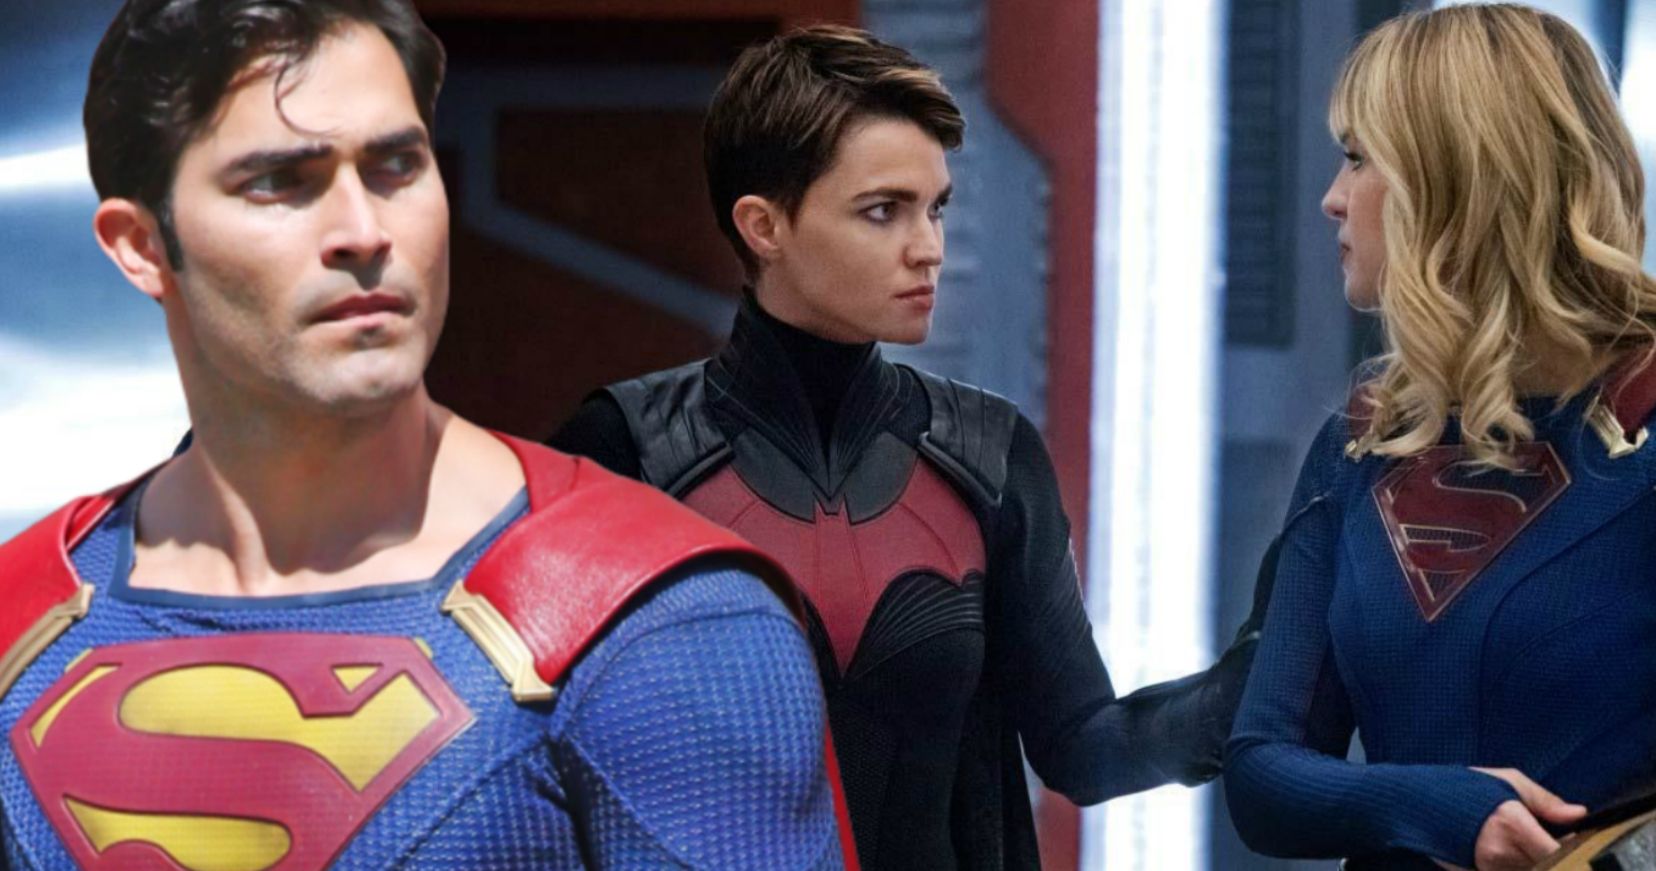 Superman and Batwoman ArrowVerse Crossover Is Happening on The CW in 2021